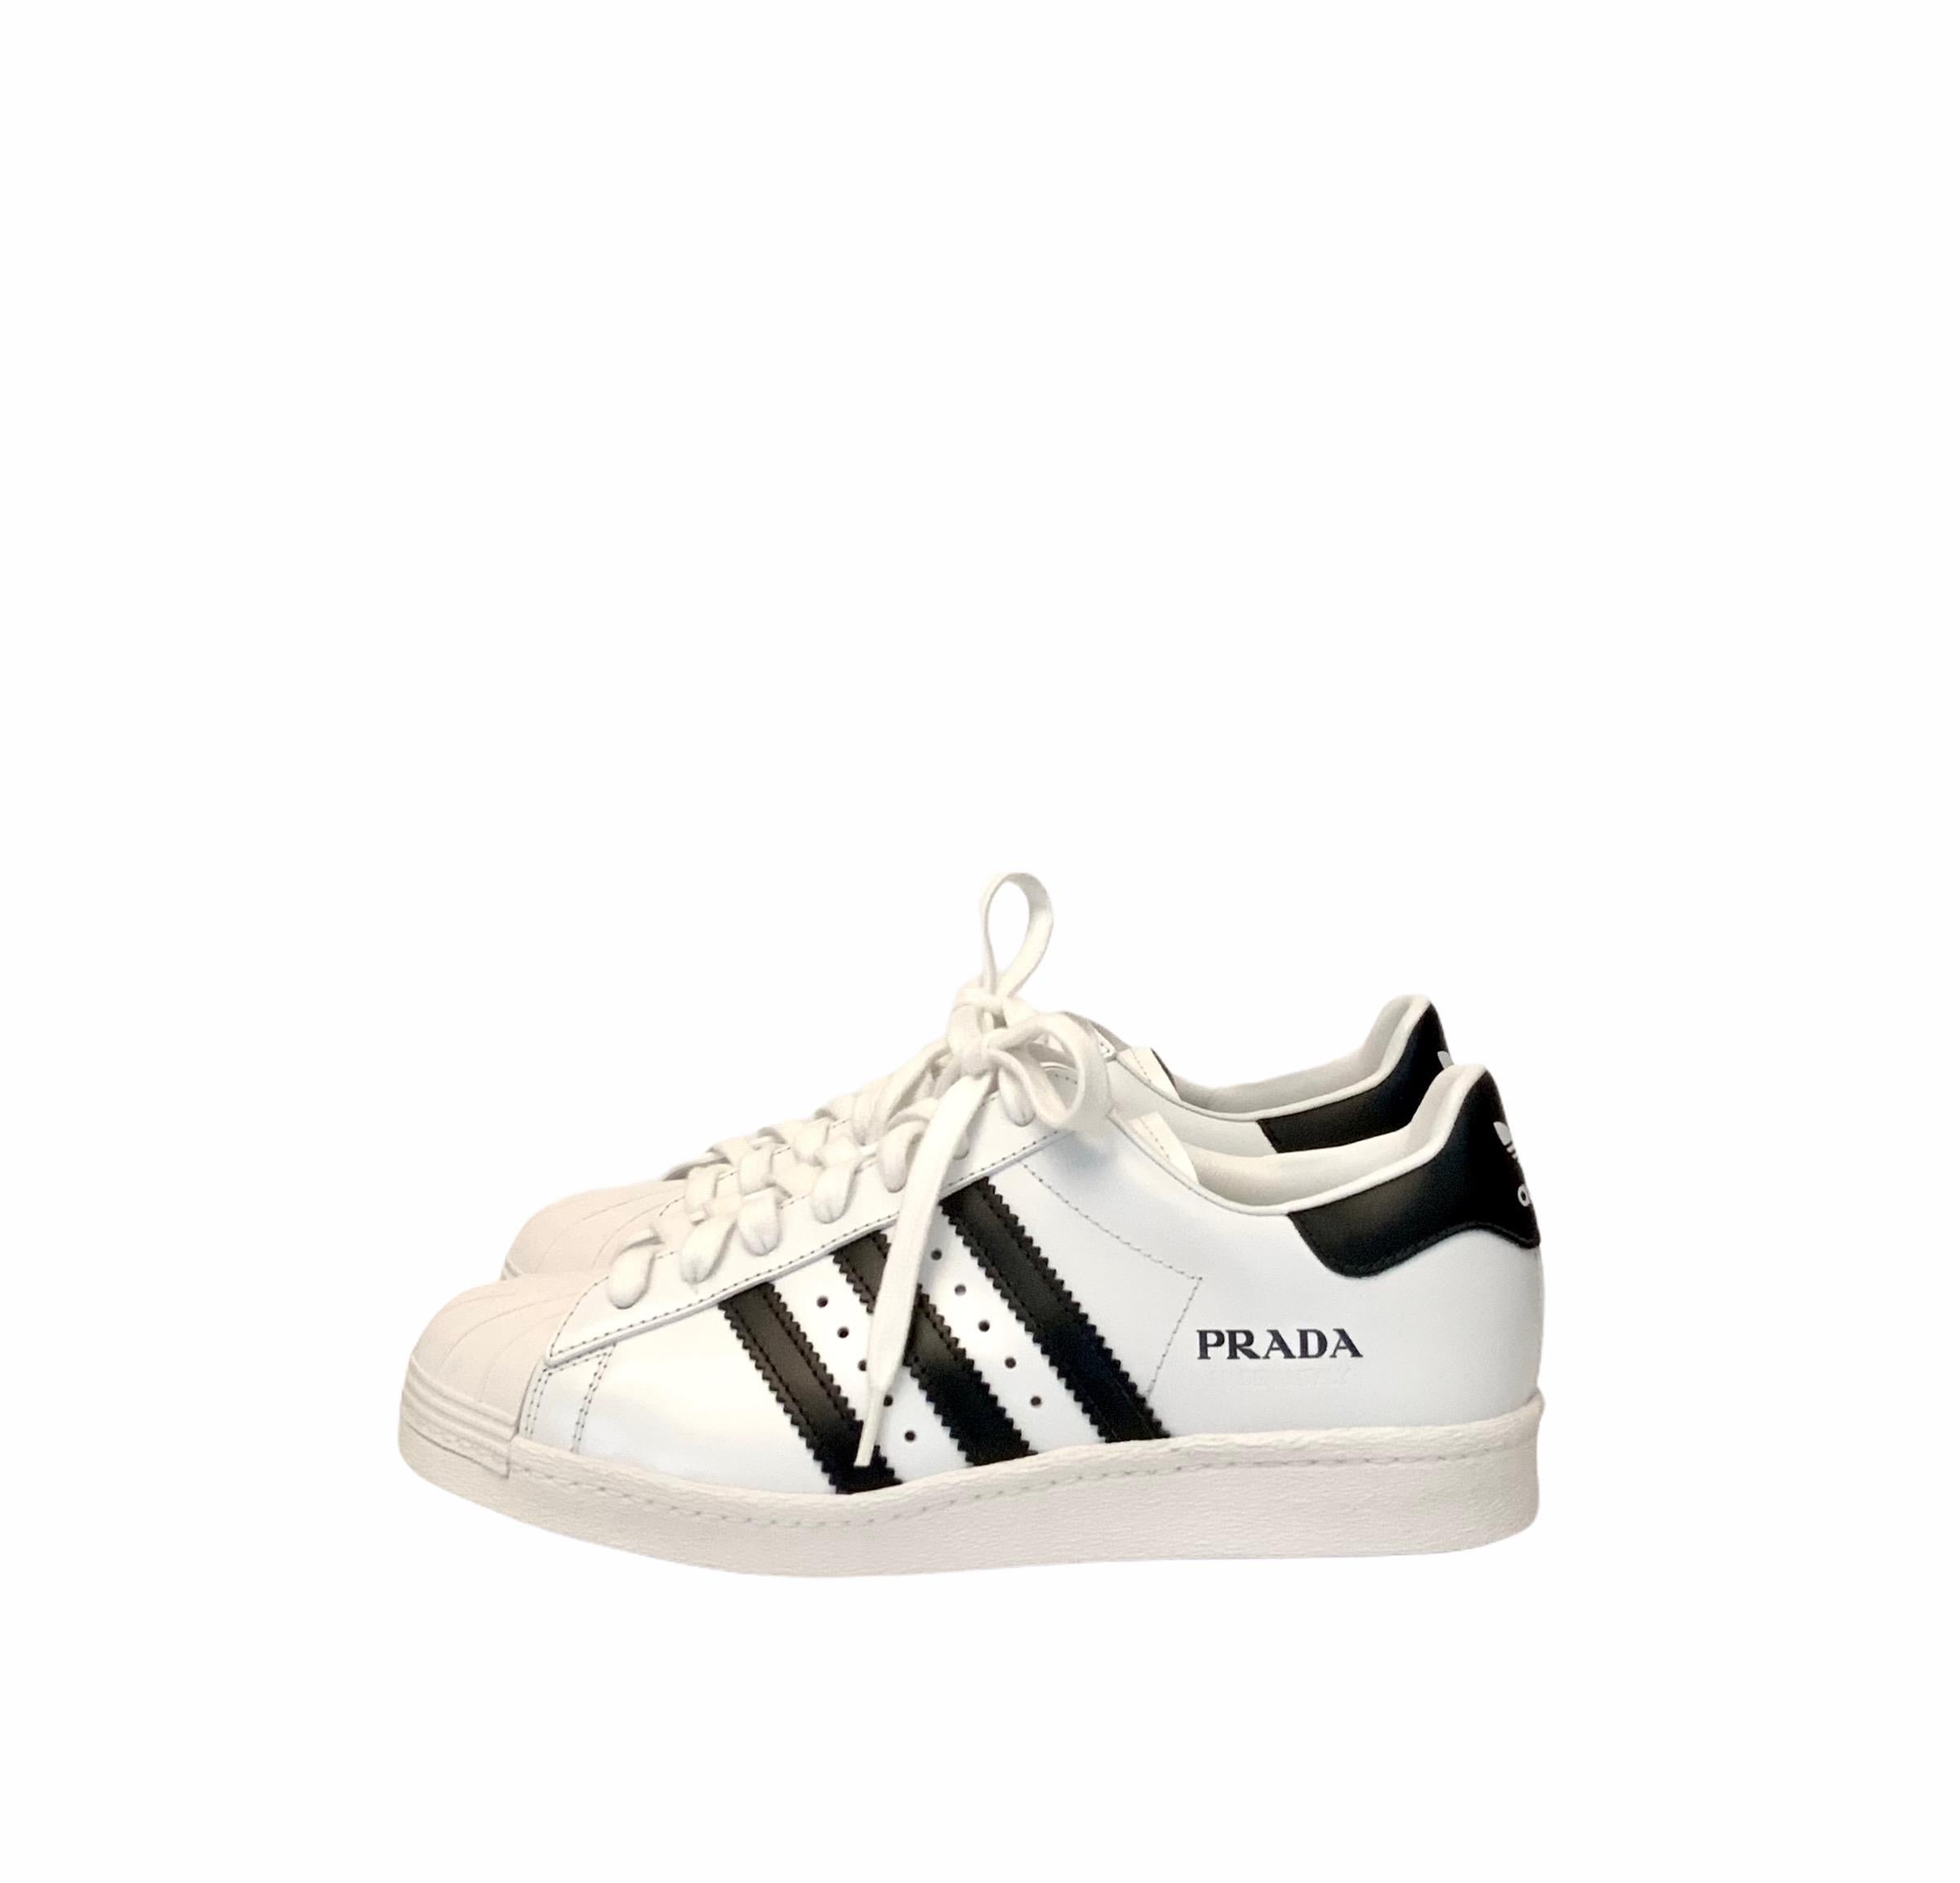 Born from the collaboration between Prada and Adidas, these pre-owned but new Superstar sneakers are handmade in Italy.
Crafted with a fine full grain leather, these Superstars feature the iconic rubber “shelltoe” with the iconic black typography